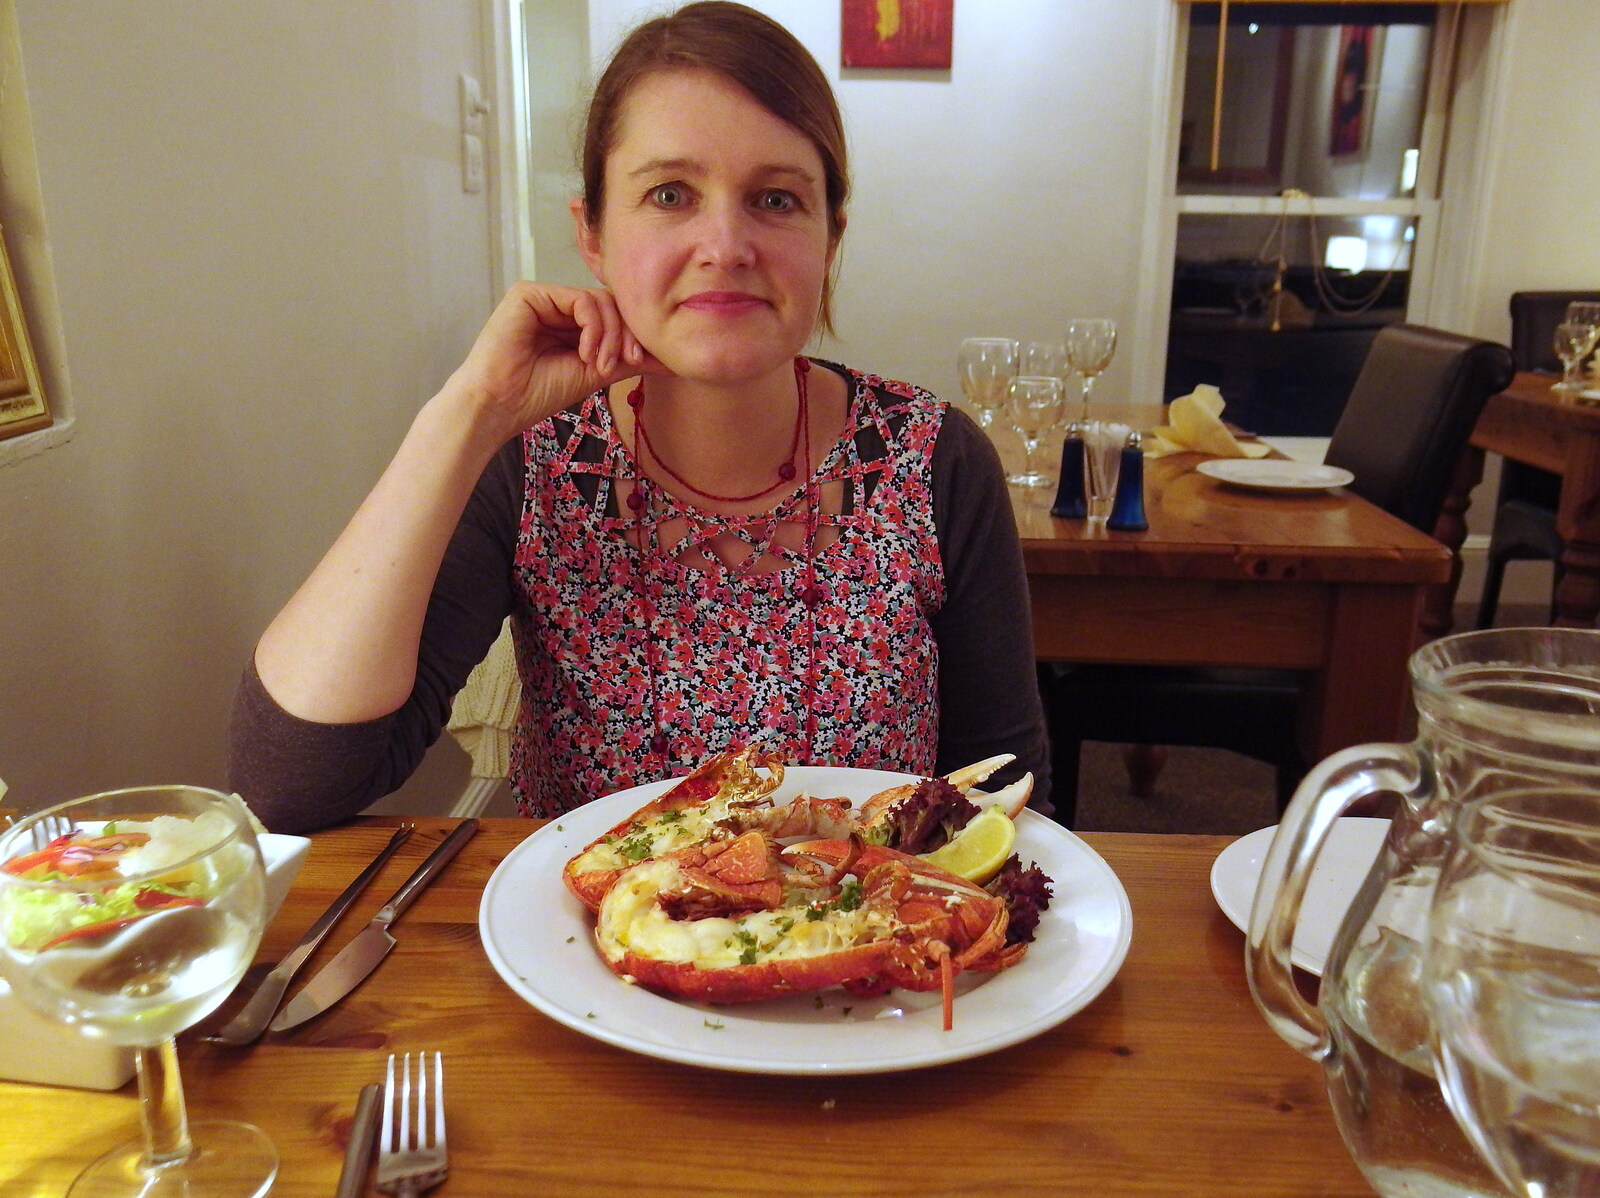 Isobel and her lobster at Lindsay House from The BSCC at The Black Horse, and an April Miscellany, Thorndon, Diss and Eye, Suffolk - 10th April 2014